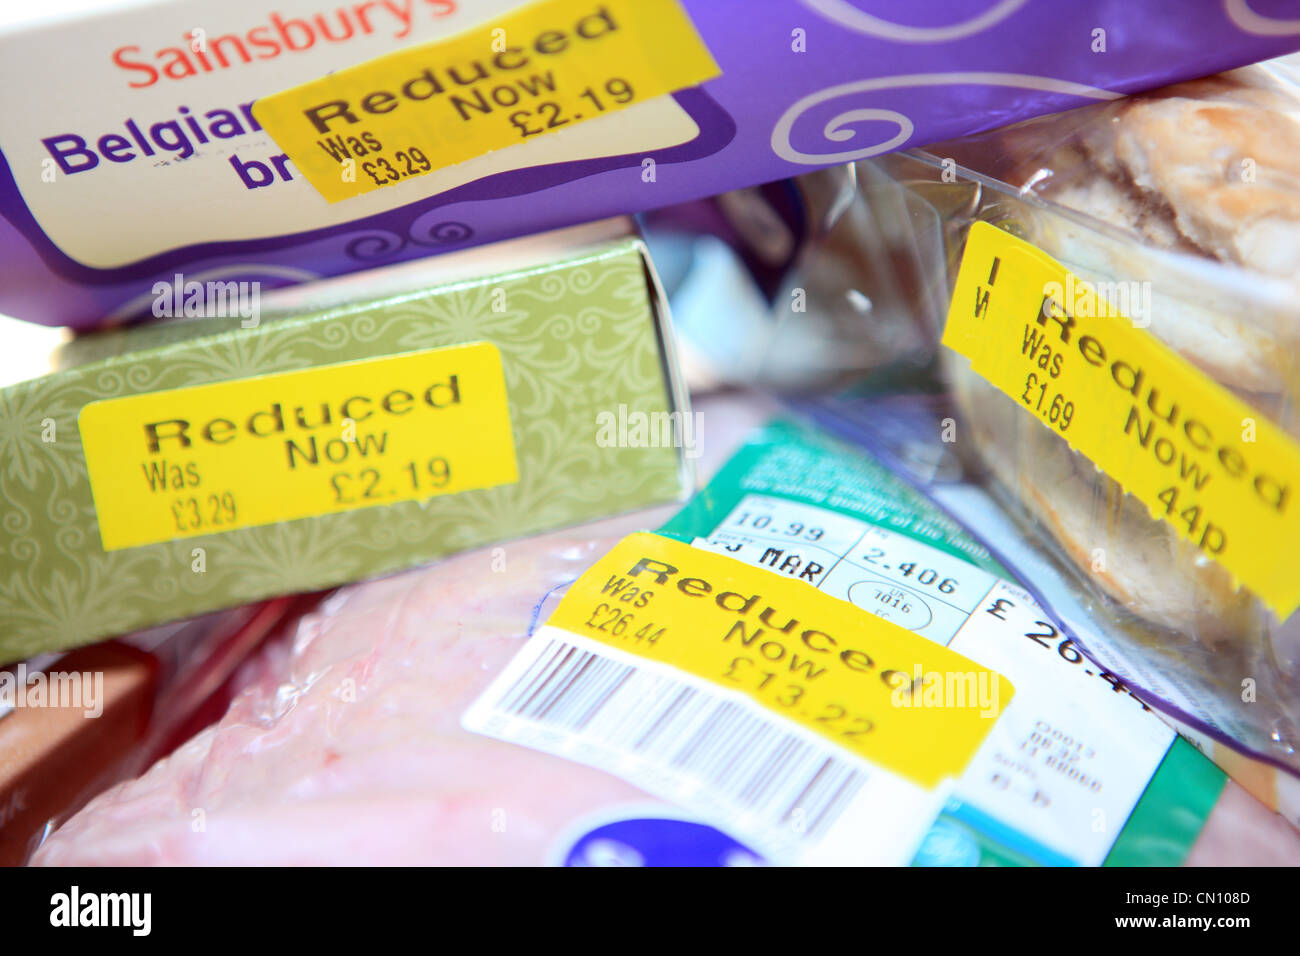 Reduced priced food items in supermarket Stock Photo